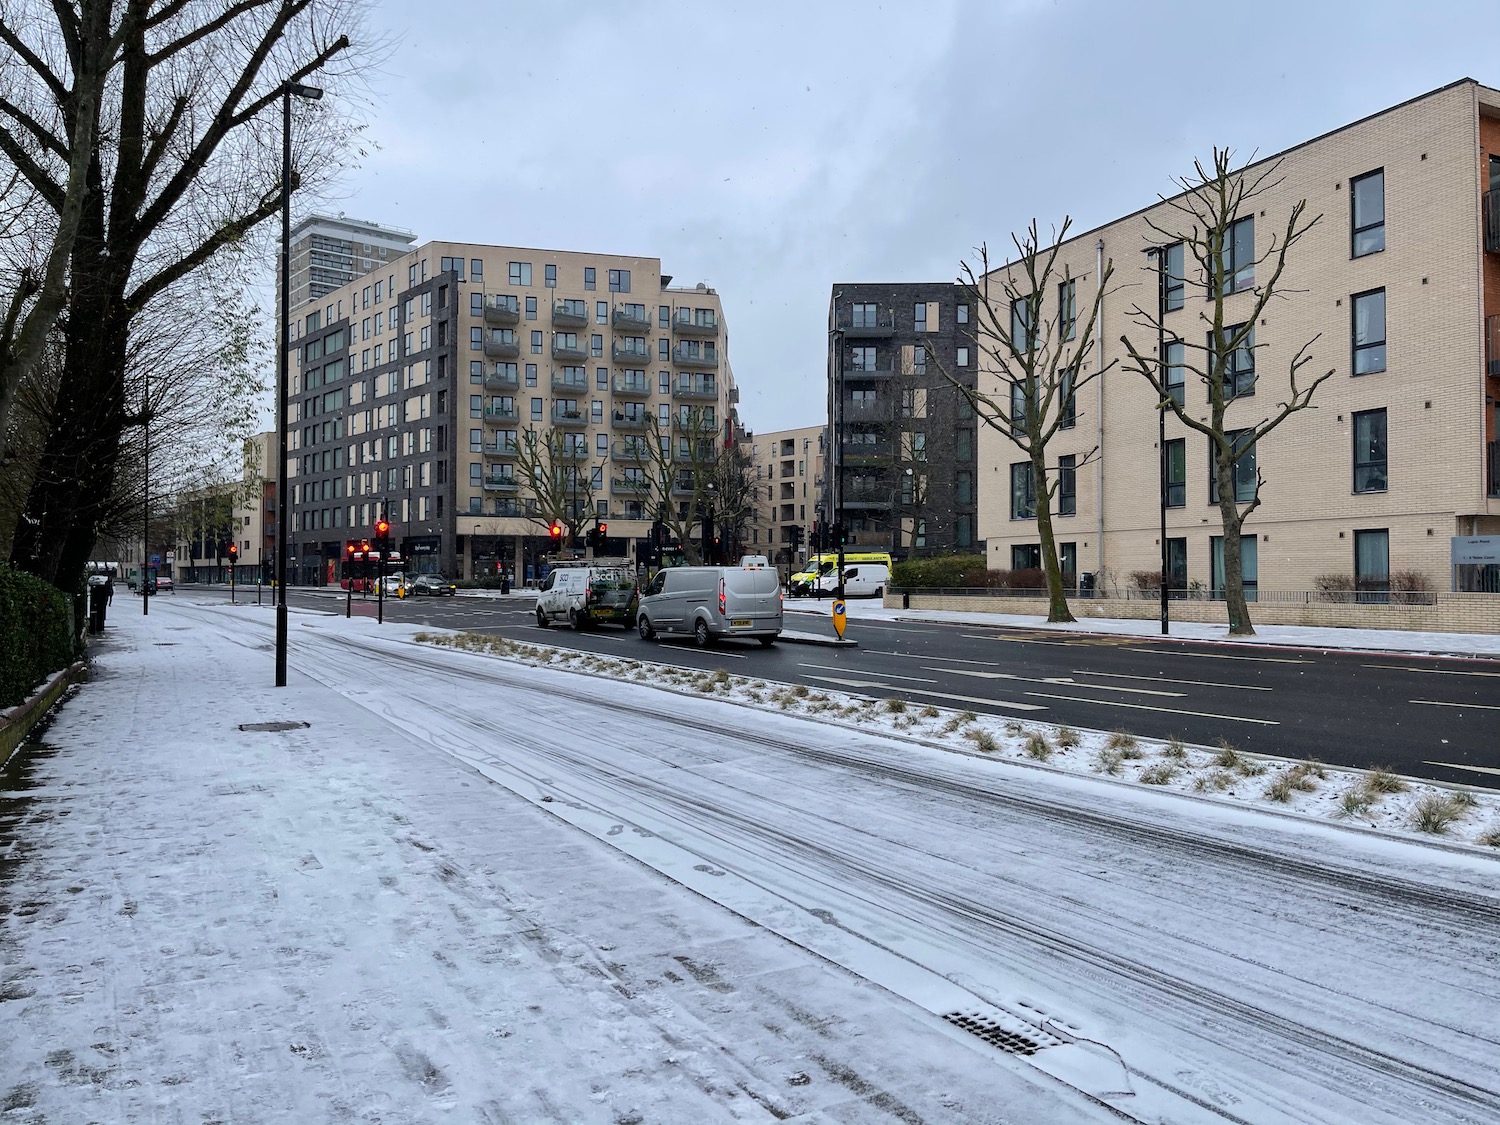 a snowy street with cars and buildings